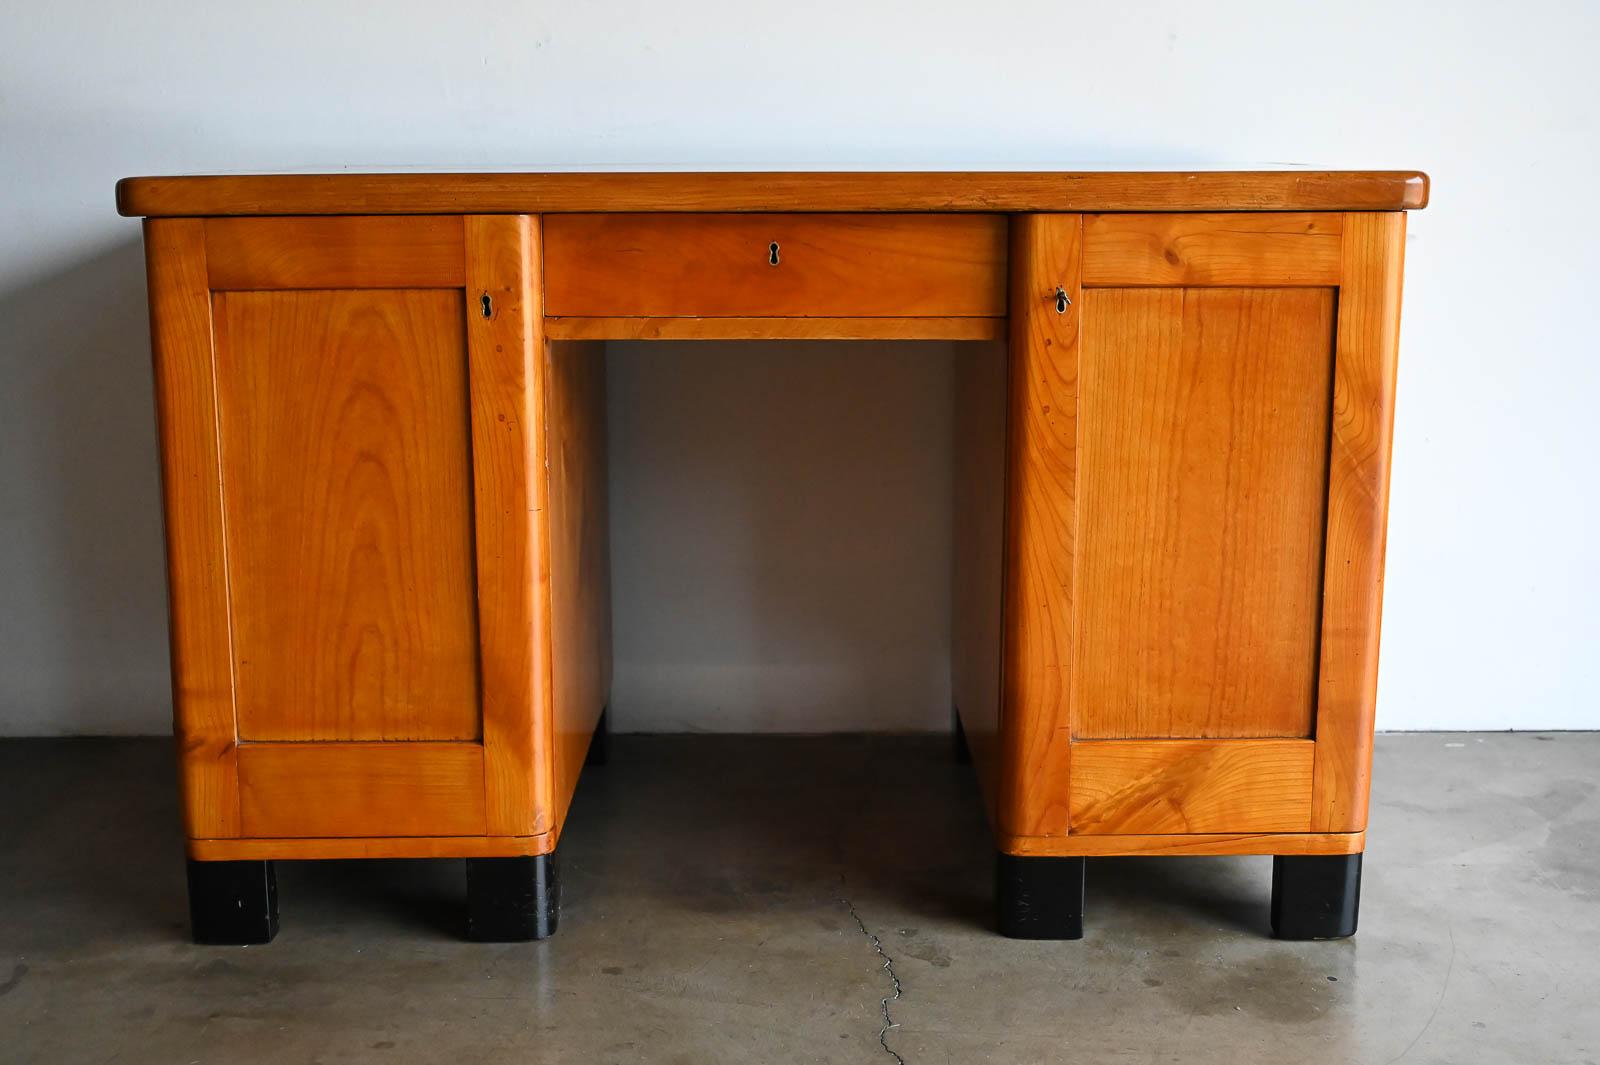 30's Art Deco Pine Desk in the style of Jean Pascaud. Handmade heavy solid pine, this beautiful desk has the original key with locking doors and inner sliding drawers. Measures 49